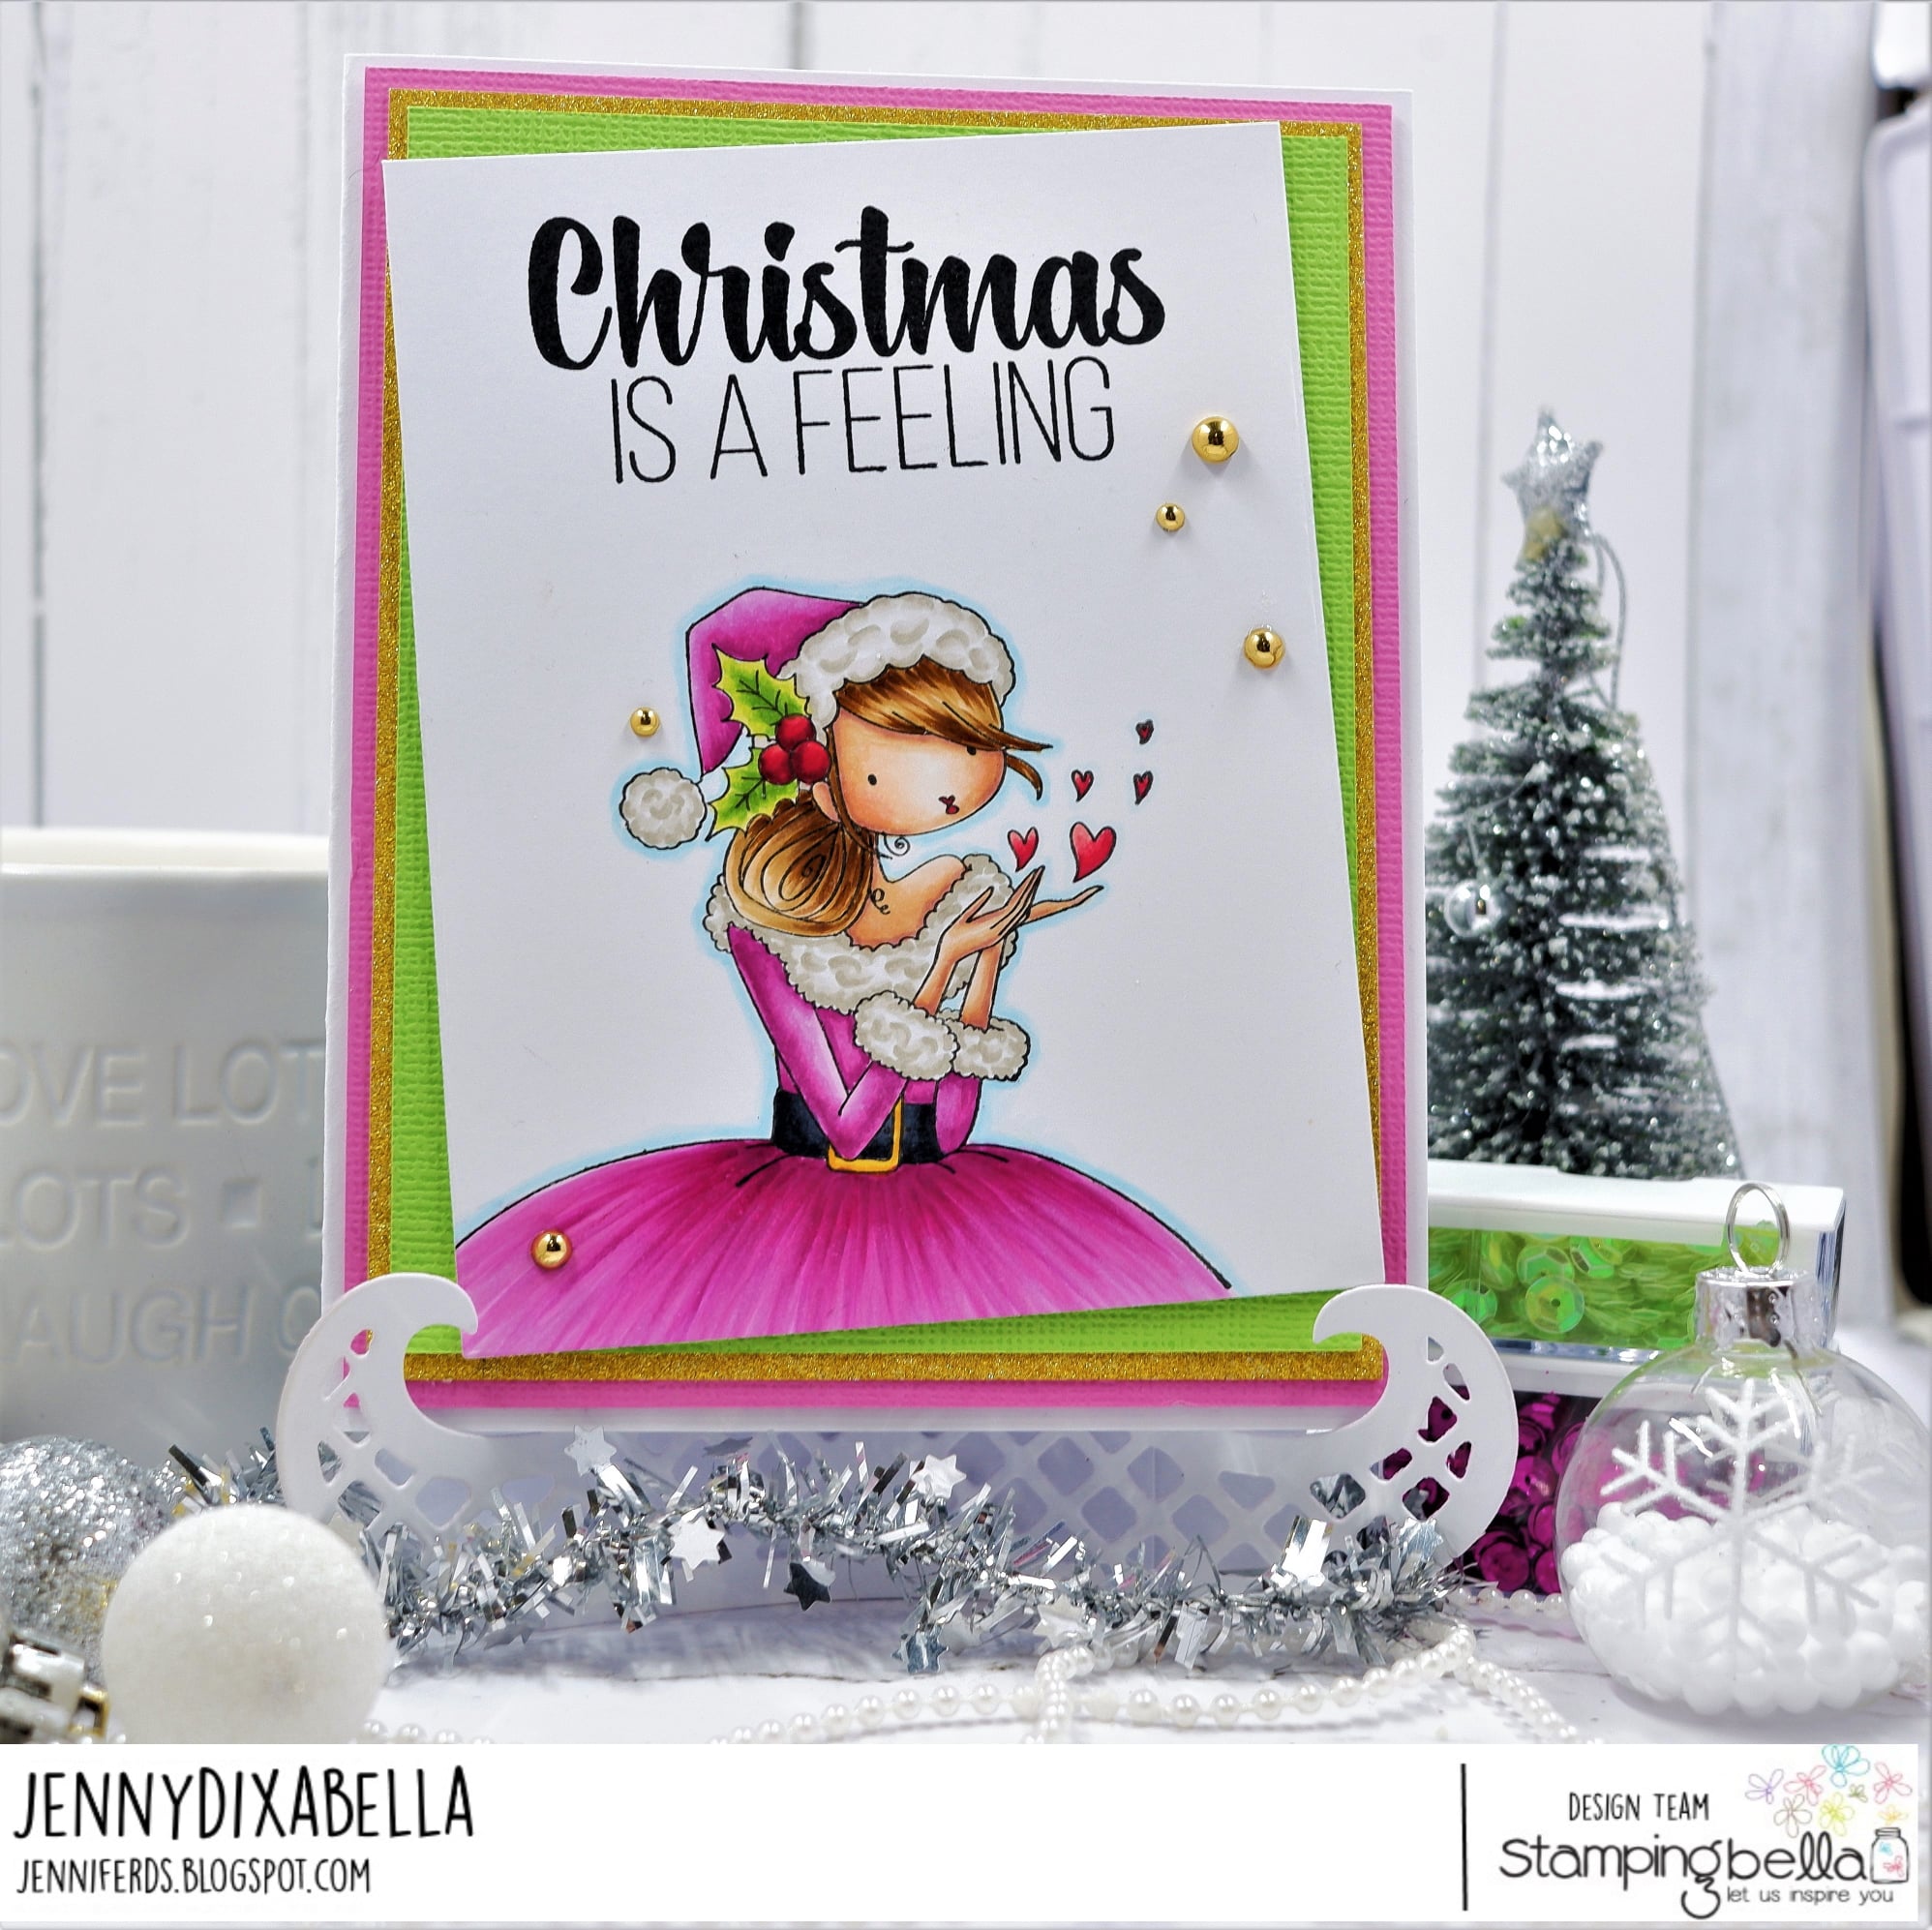 www.stampingbella.com: rubber stamp used:Katrina's CHRISTMAS KISSEScard by Jenny Dix